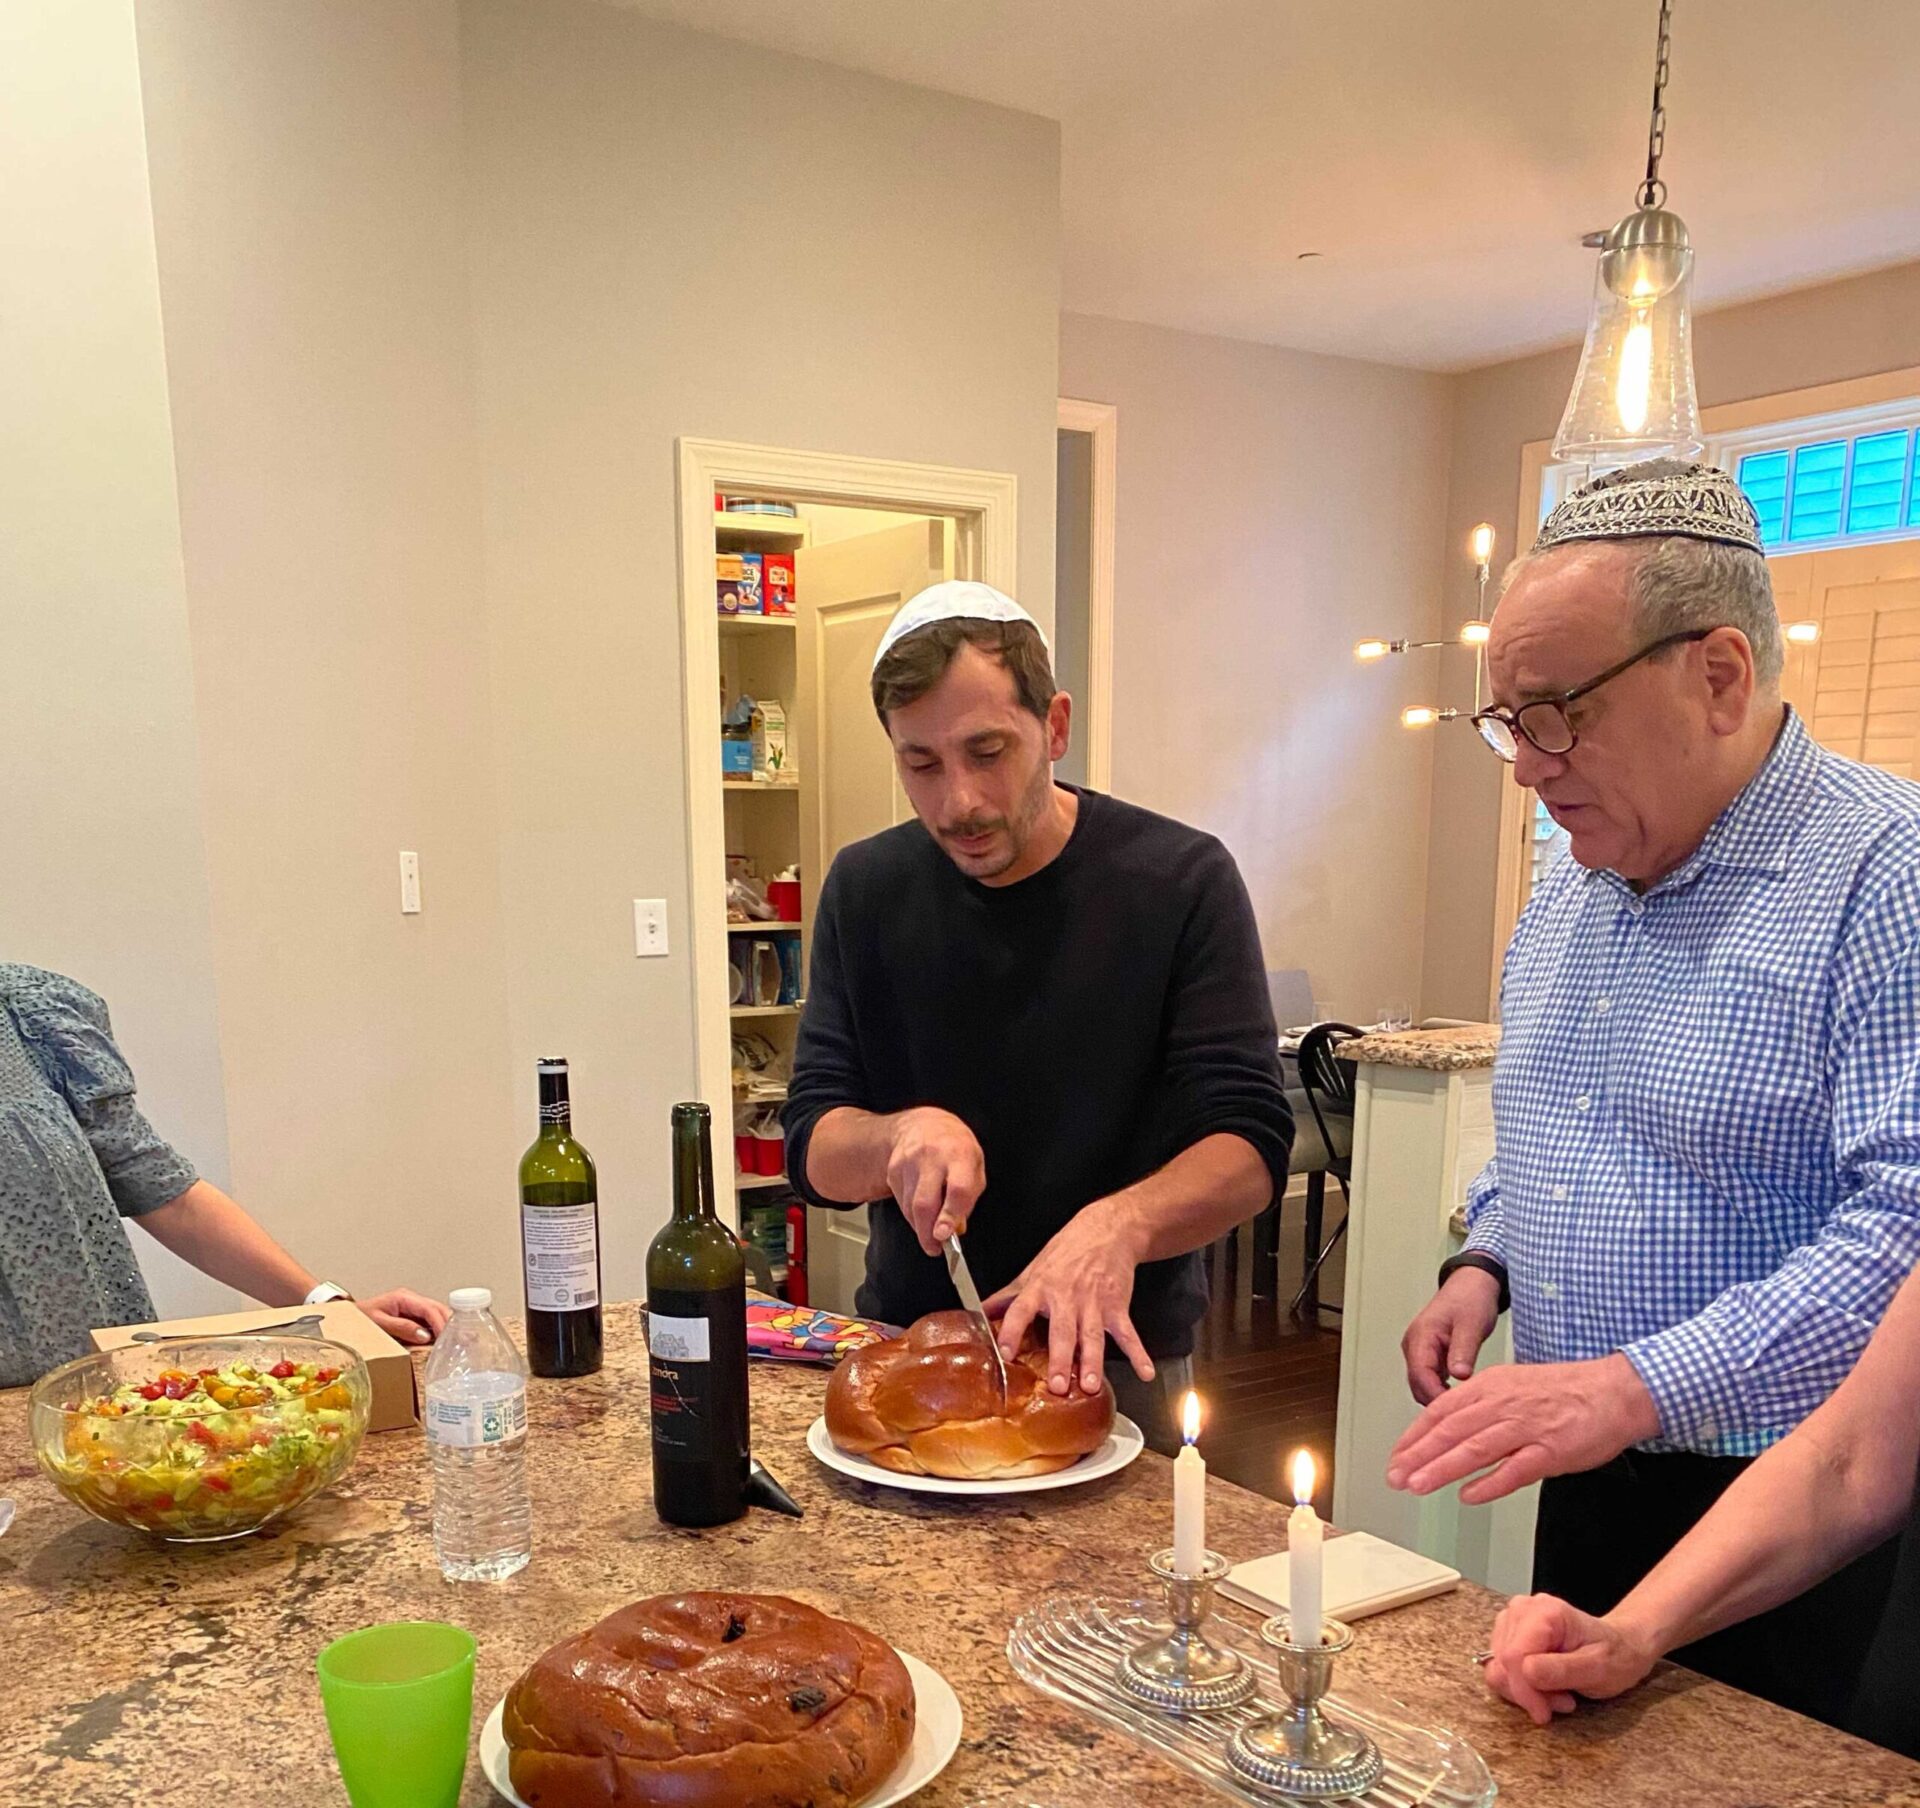 Celebrating Hanukkah 2021 with a Classically Trained French Private Chef